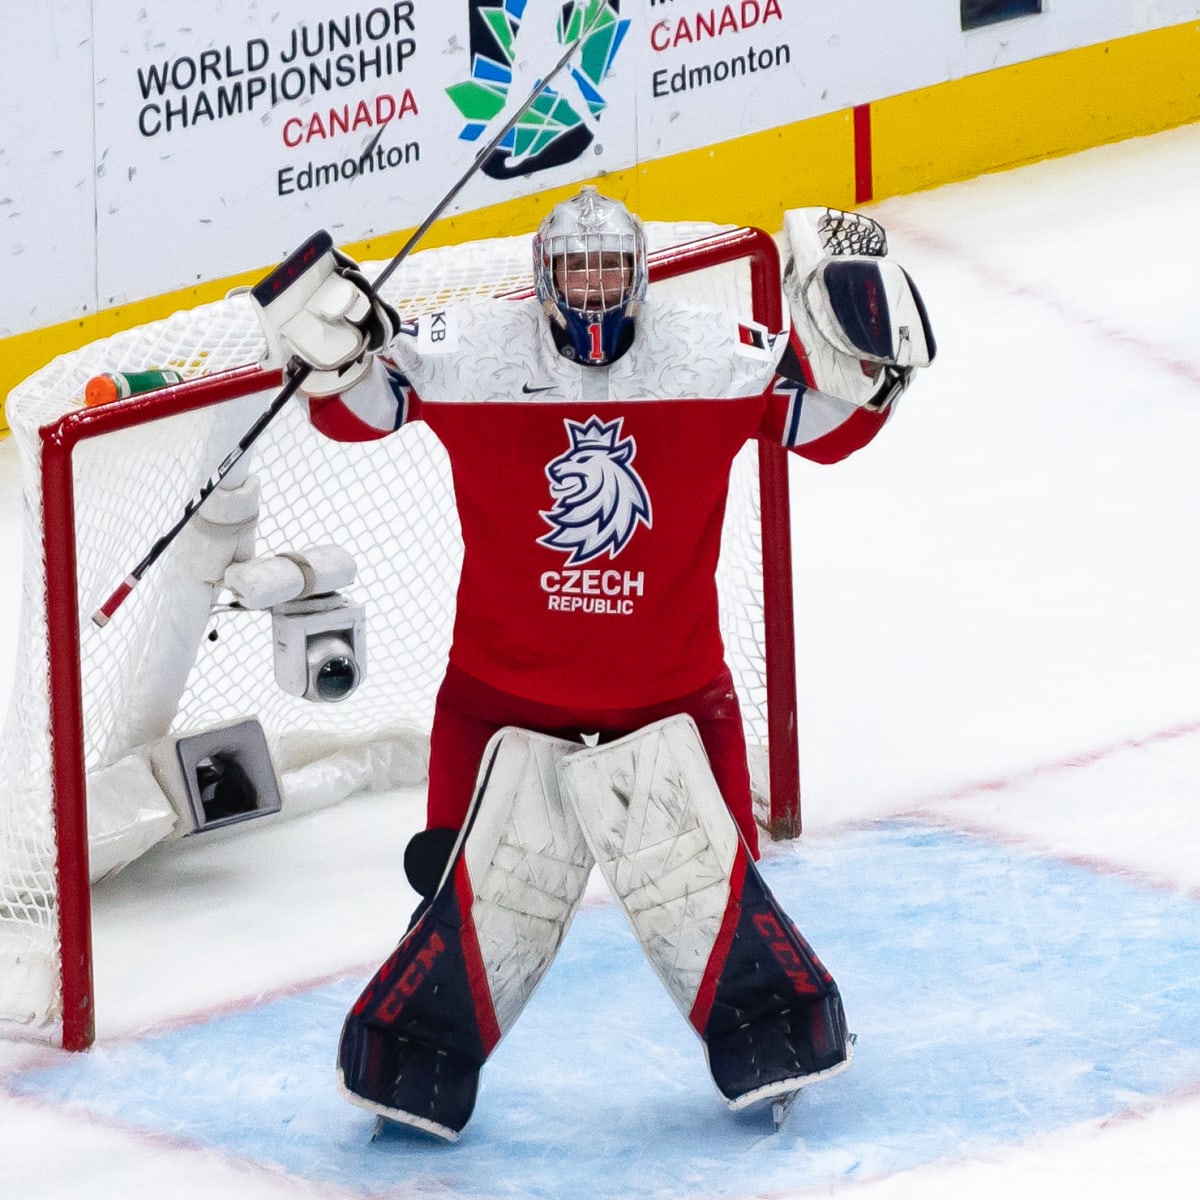 Four Hot Takes for the World Junior Championship